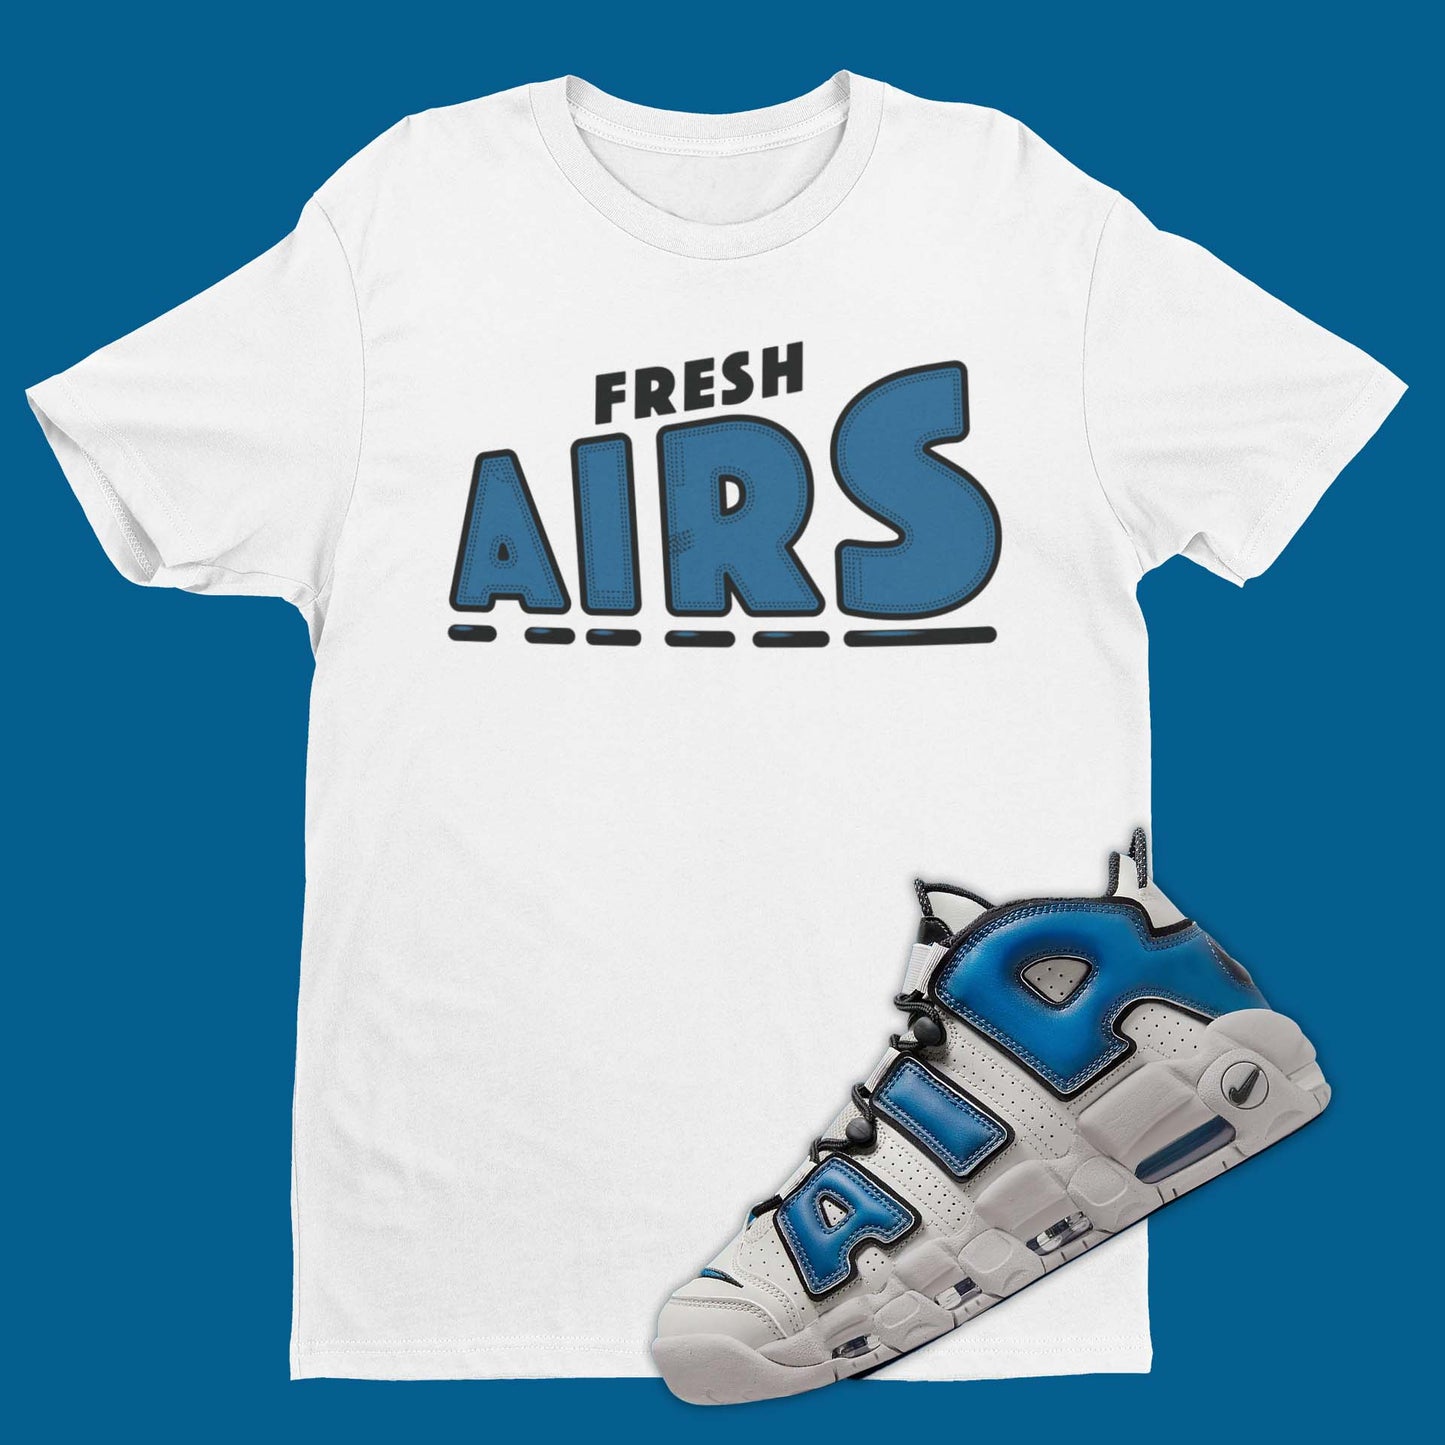 Fresh Airs Nike Air More Uptempo Industrial Blue Matching T-Shirt from SNKADX